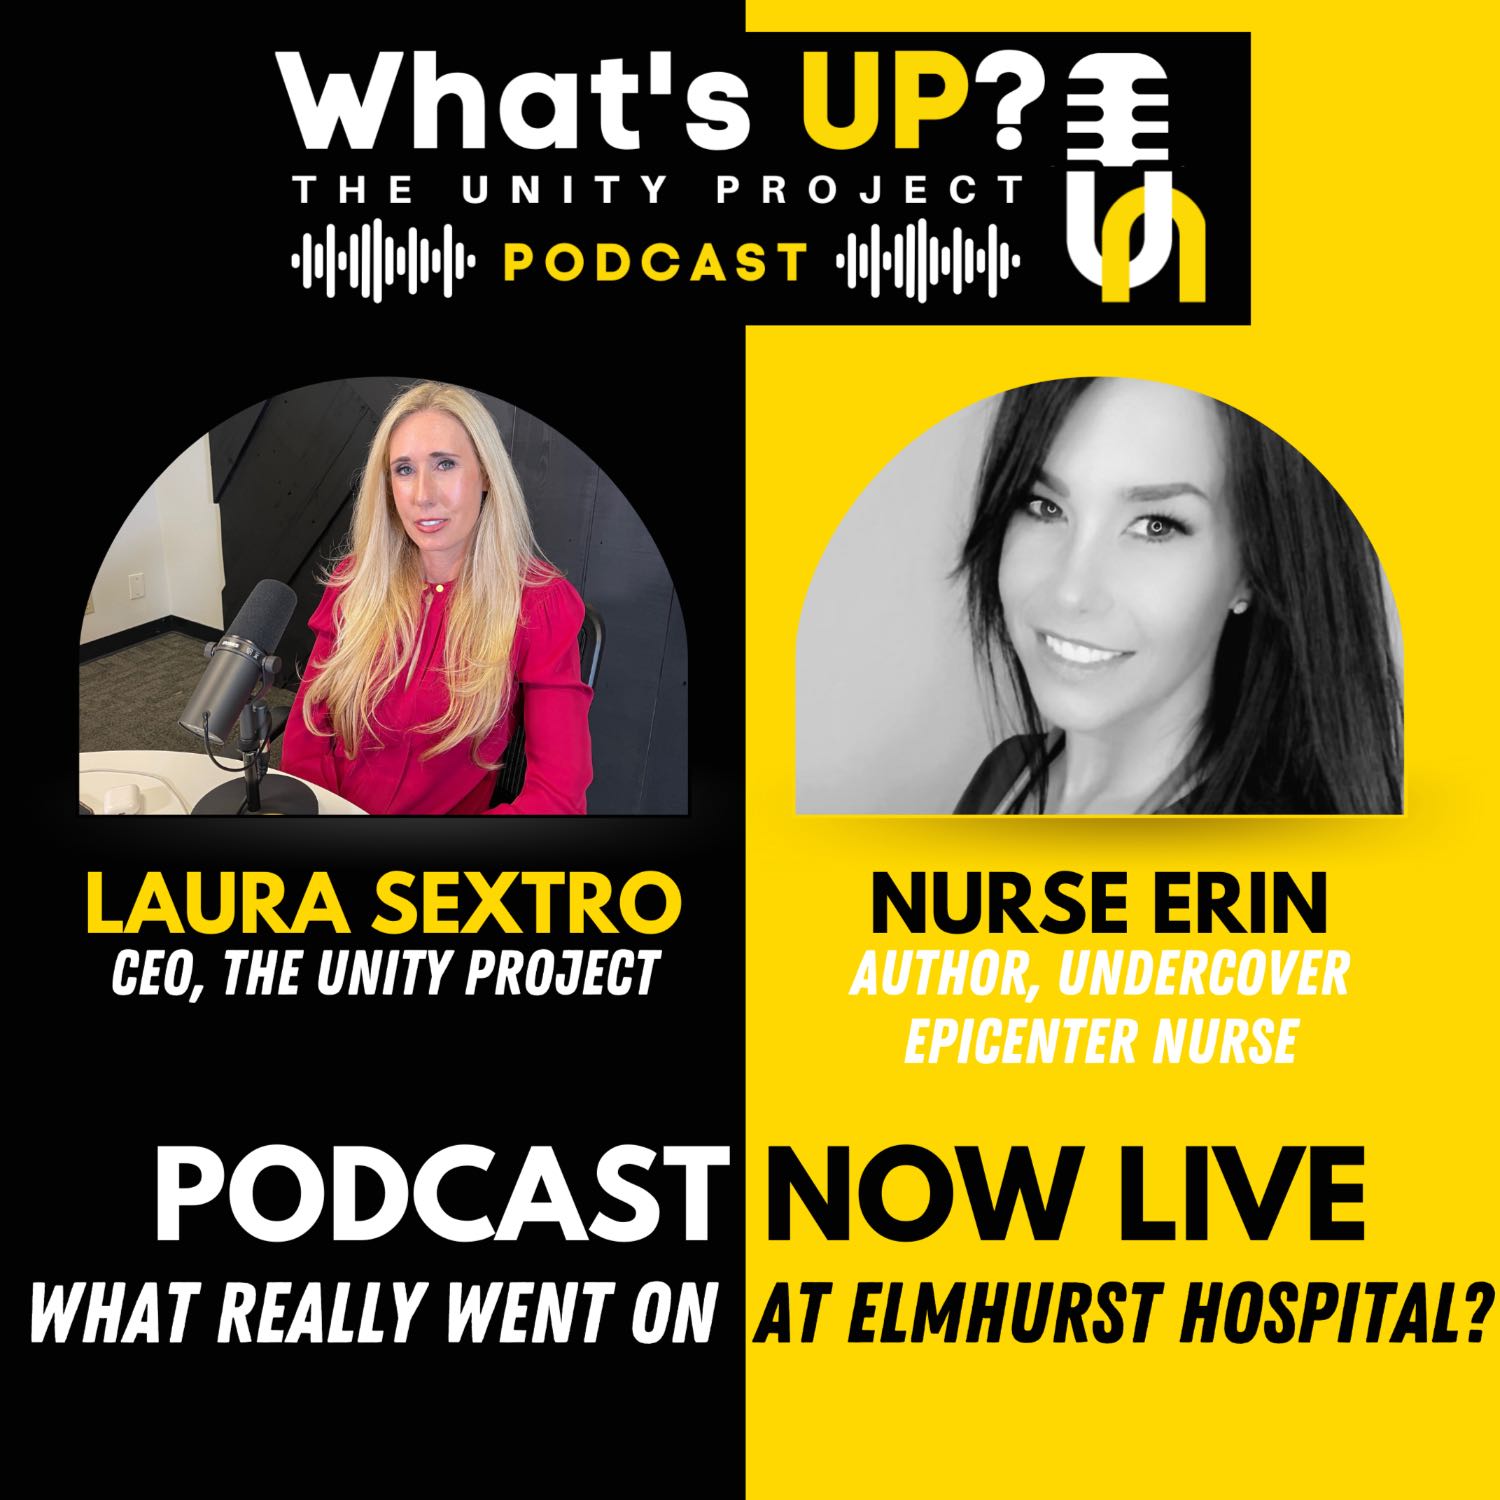 Ep. 1: Unity Project Podcast with Nurse Erin – Exposing fraud, patient neglect and Nuremberg 2.0